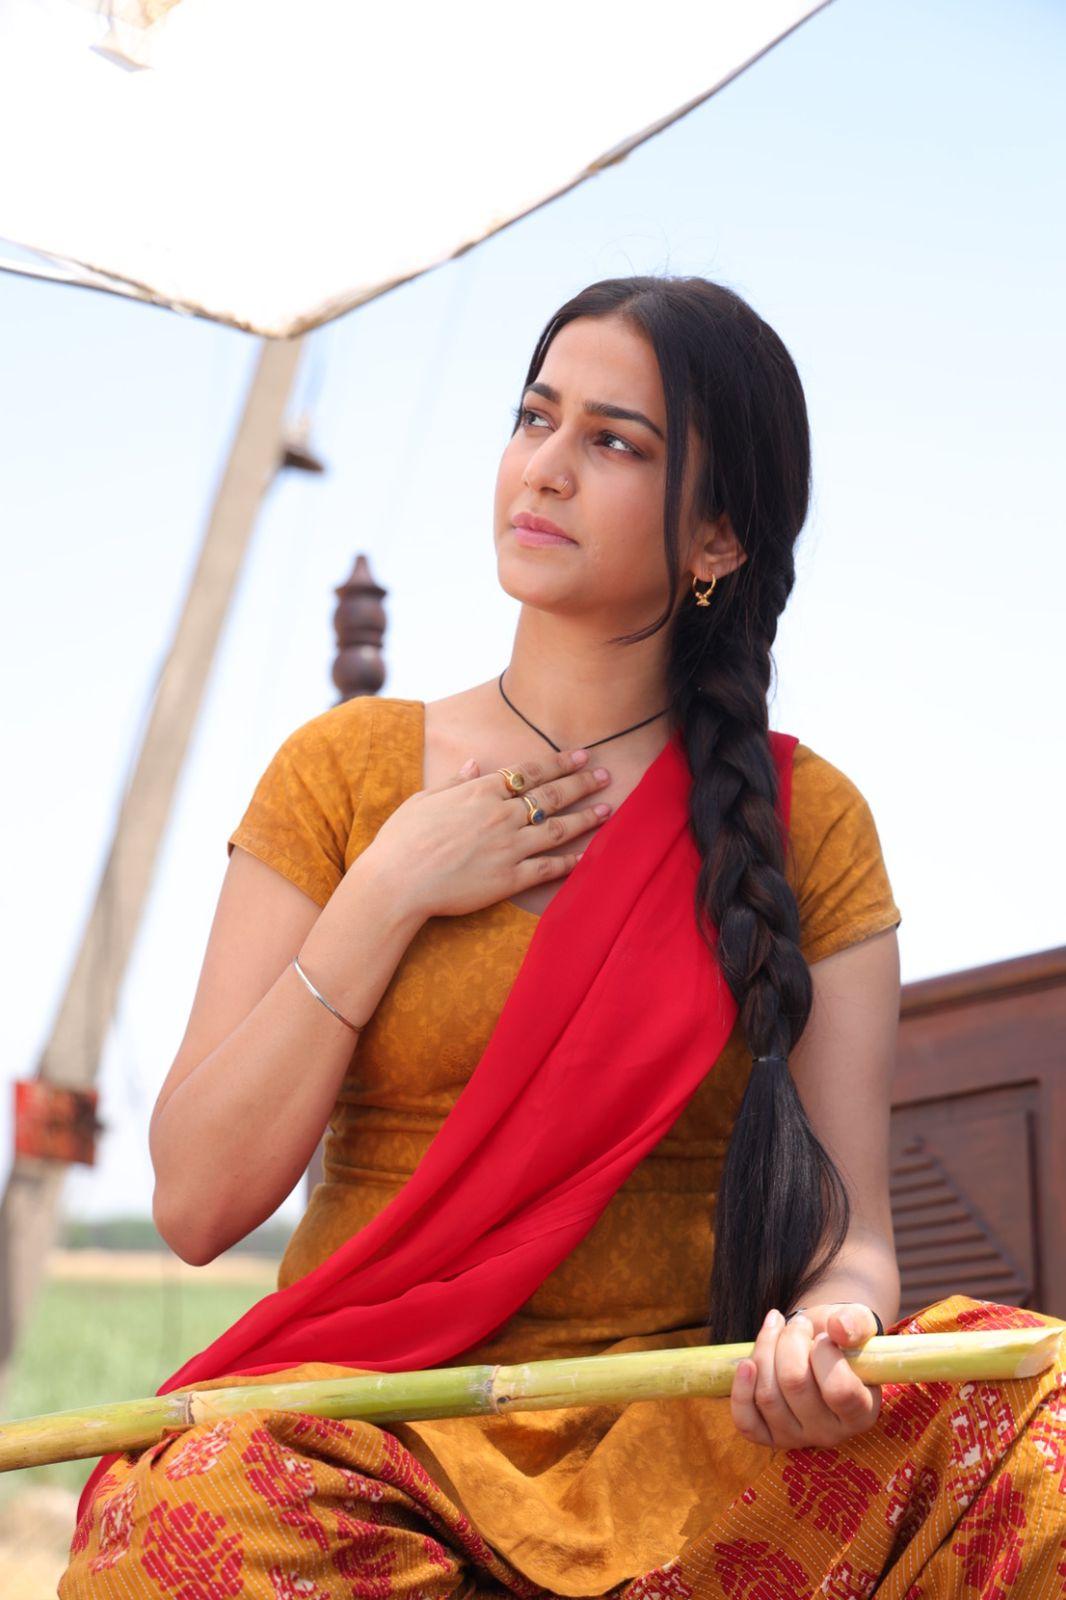 The show stars Amandeep Sidhu as Baani, who wants to give a better life to herself and her parents and her dreams are bigger than the obstacles she faces in life